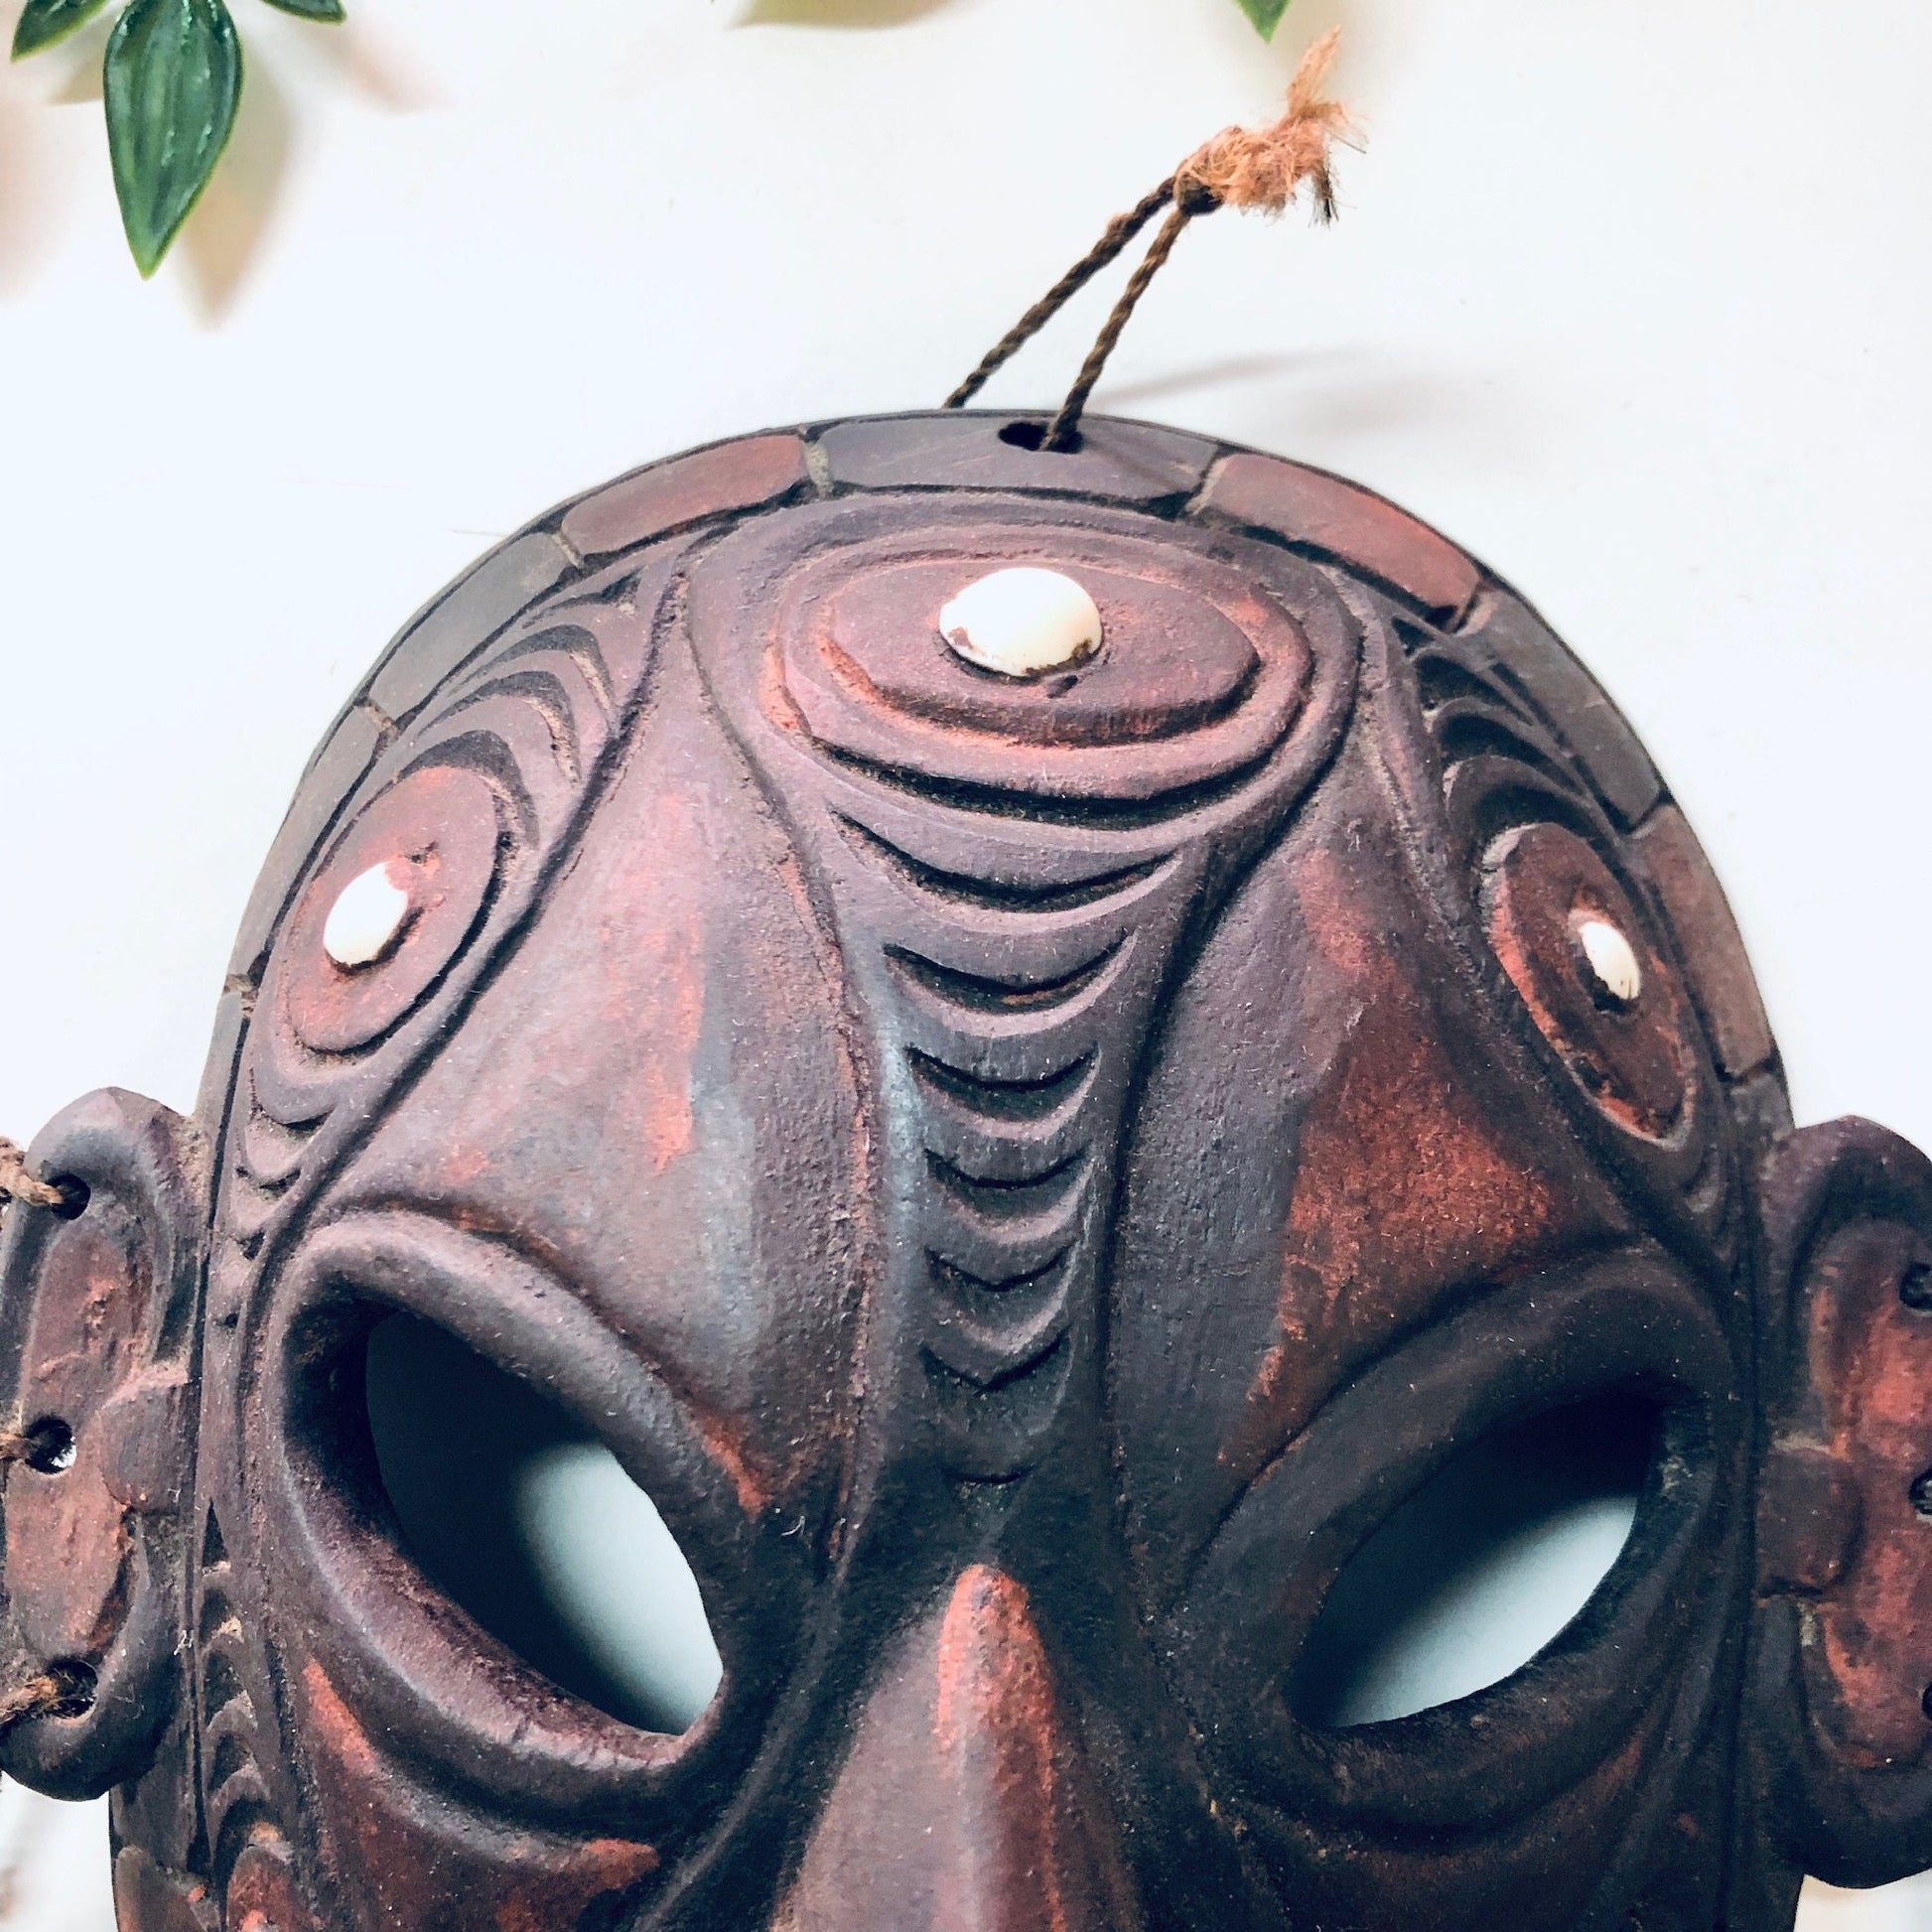 Vintage hand carved wooden tribal mask with intricate spiral designs and cut out details, used as unique wall hanging home decor art piece.